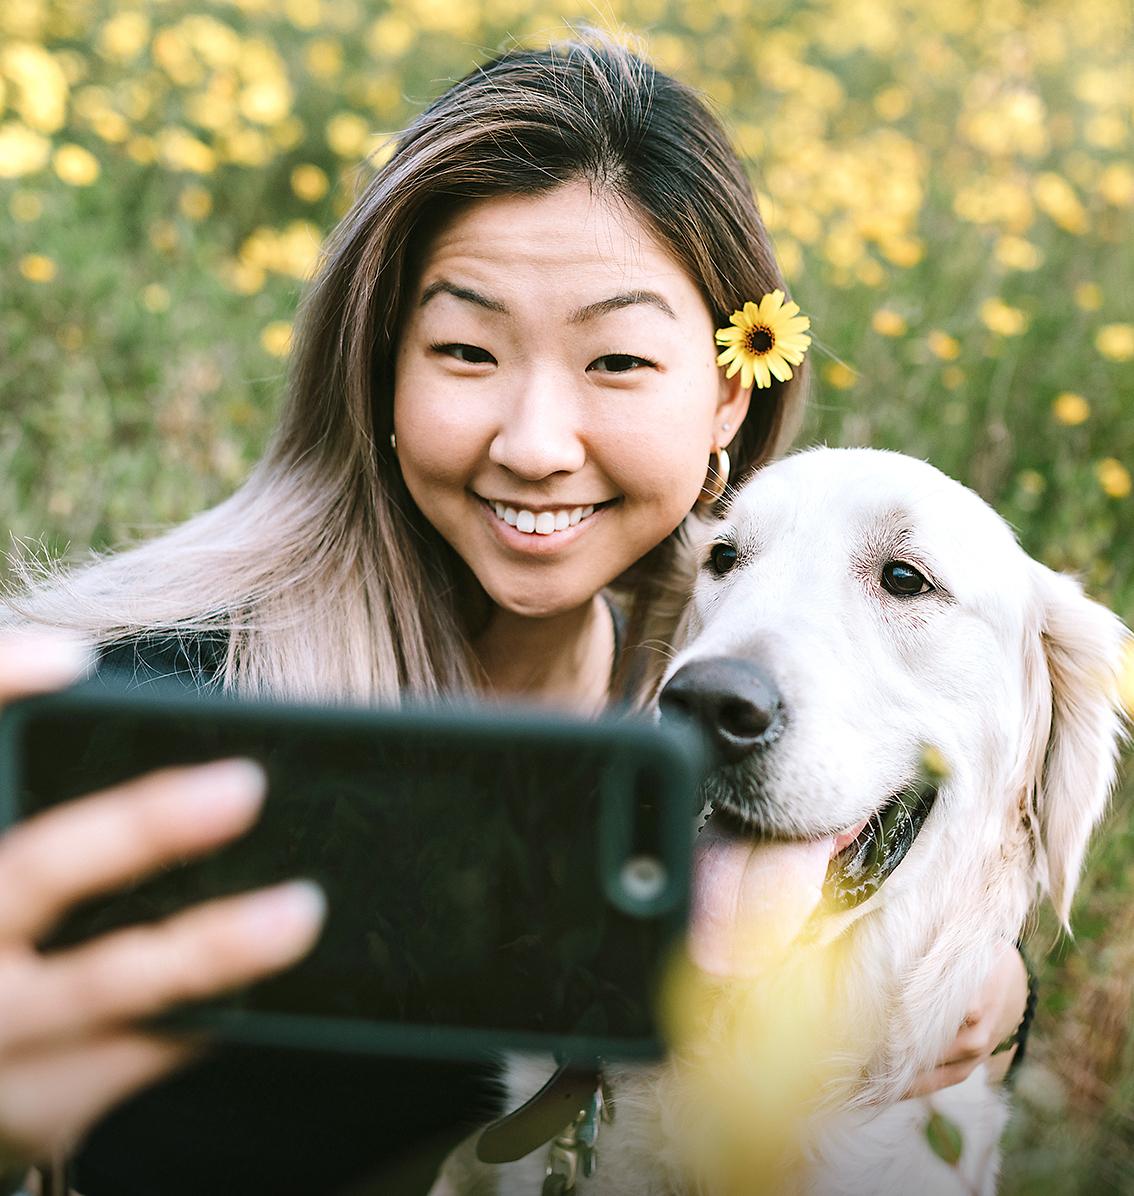 woman taking a photo with a golden retriever in a field